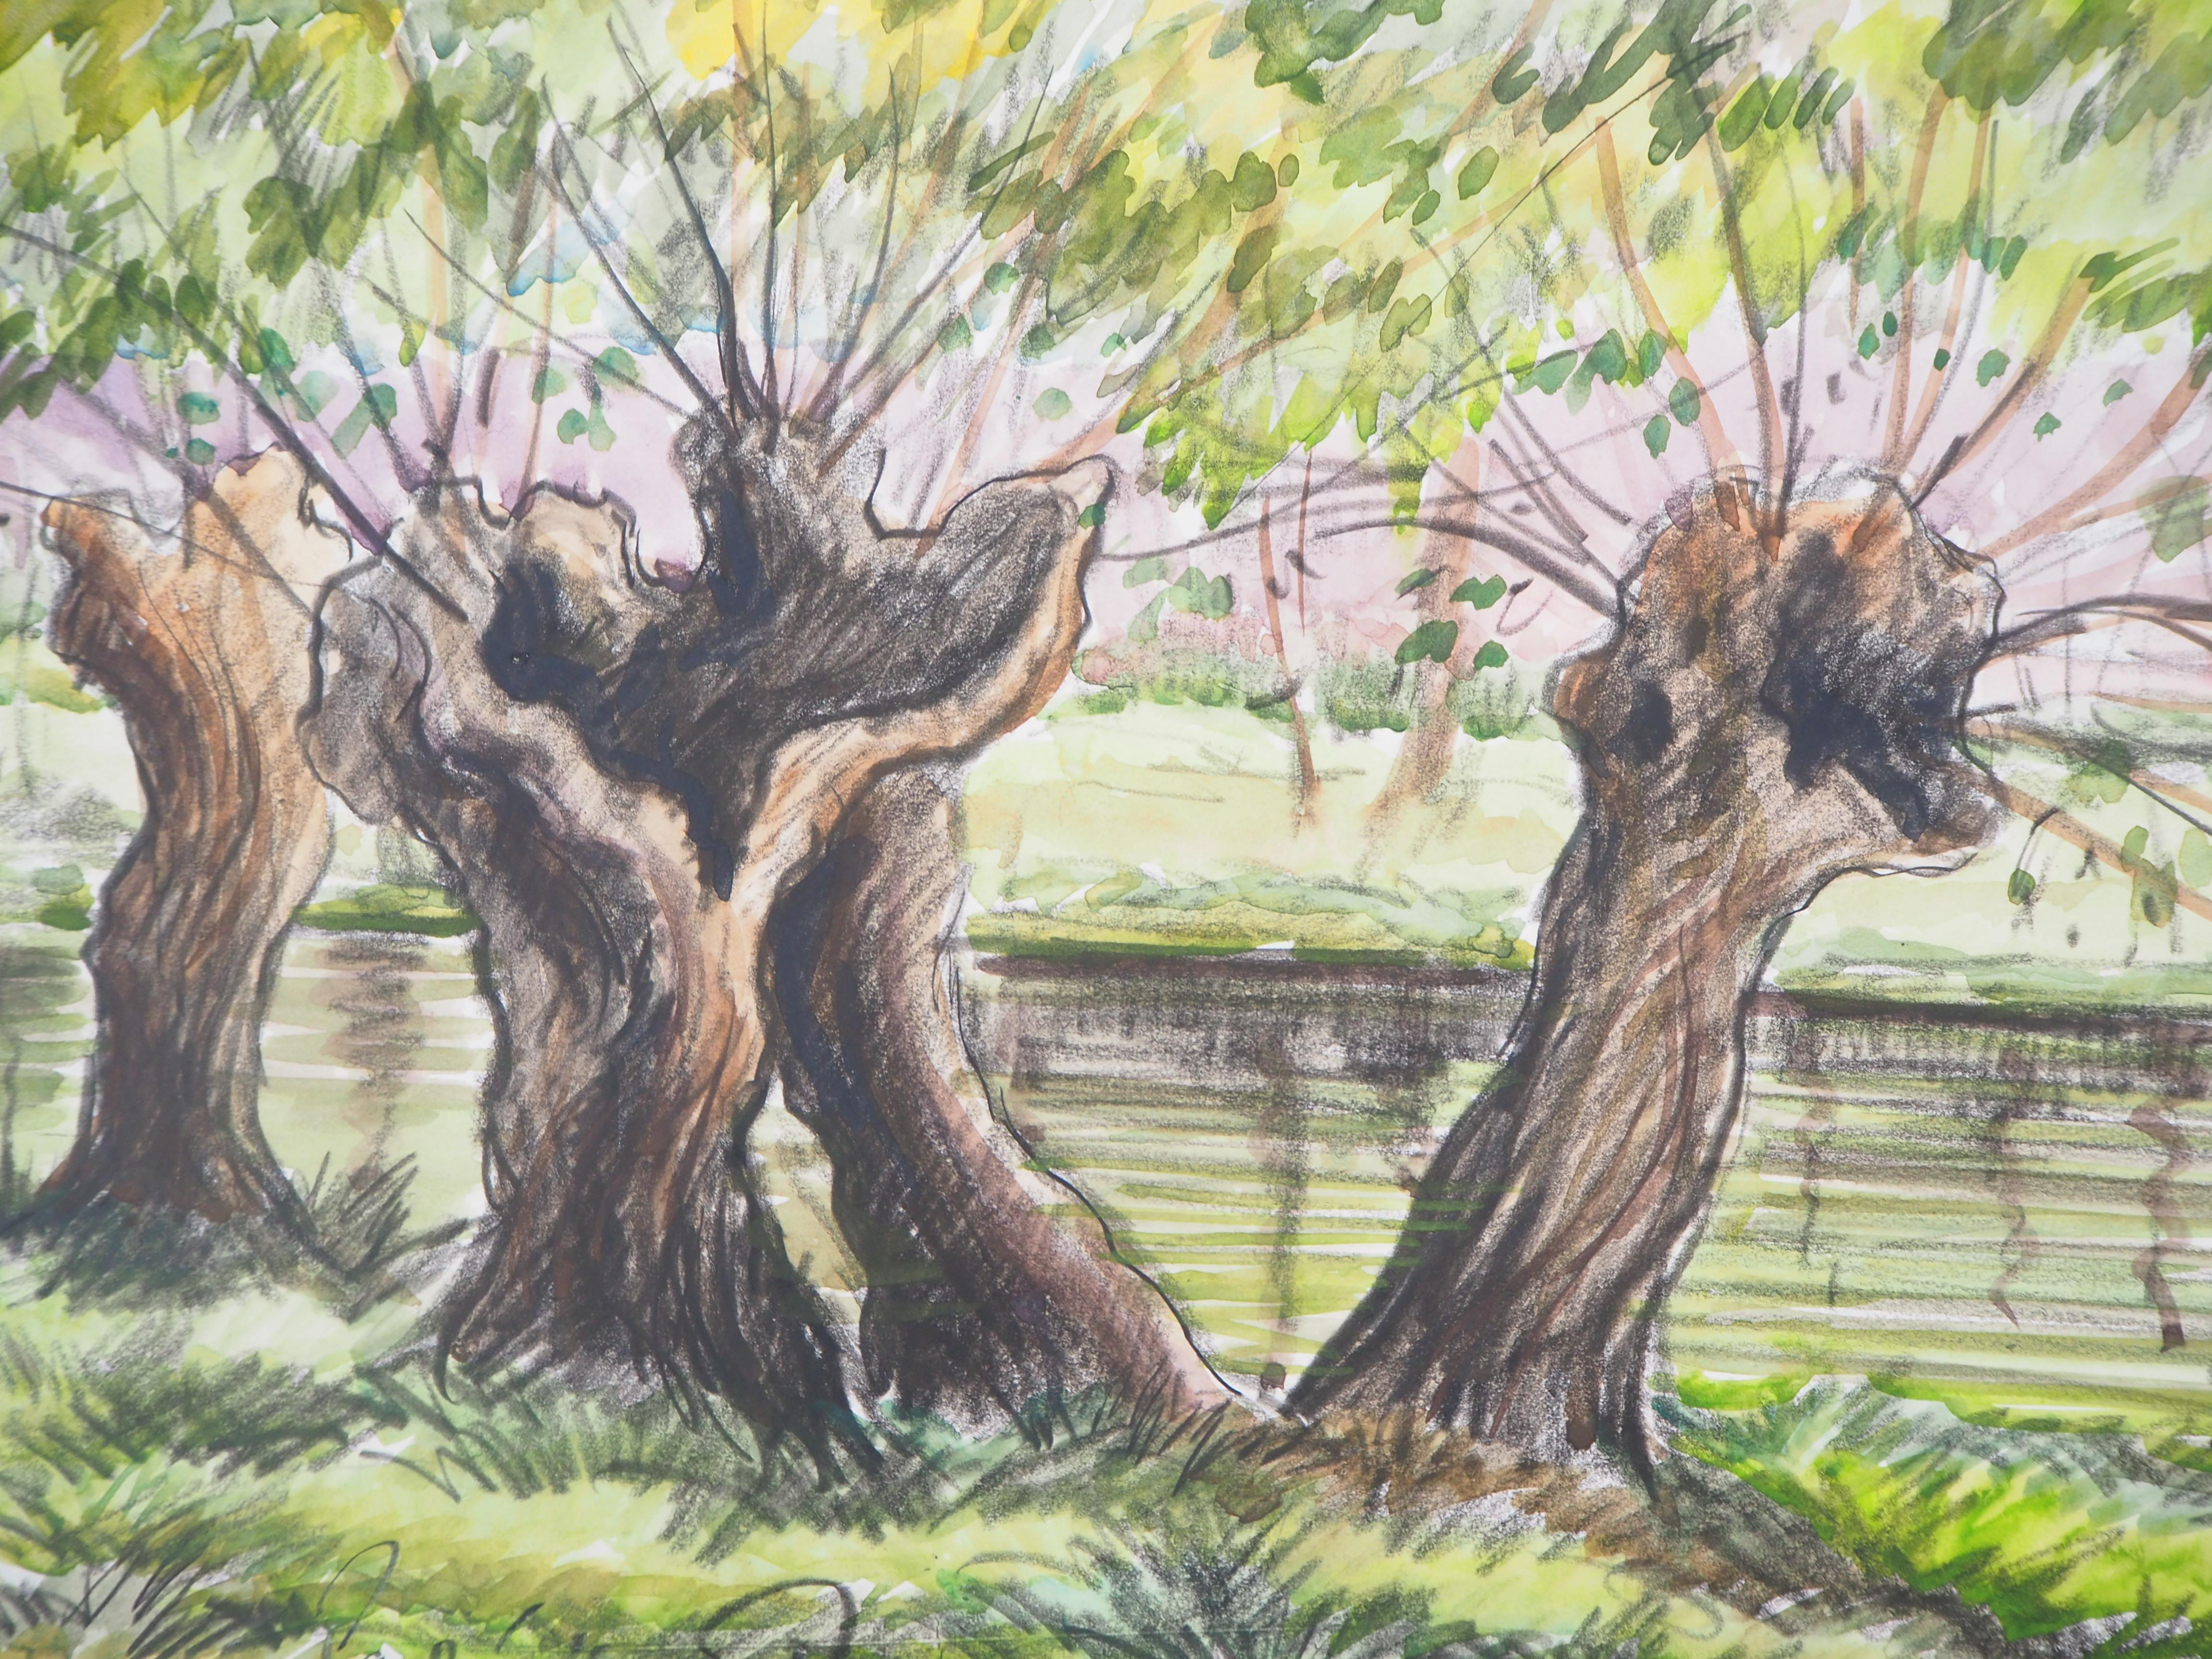 Old Trees near a Canal - Original watercolor painting - Signed - Impressionist Art by Paul Emile Pissarro